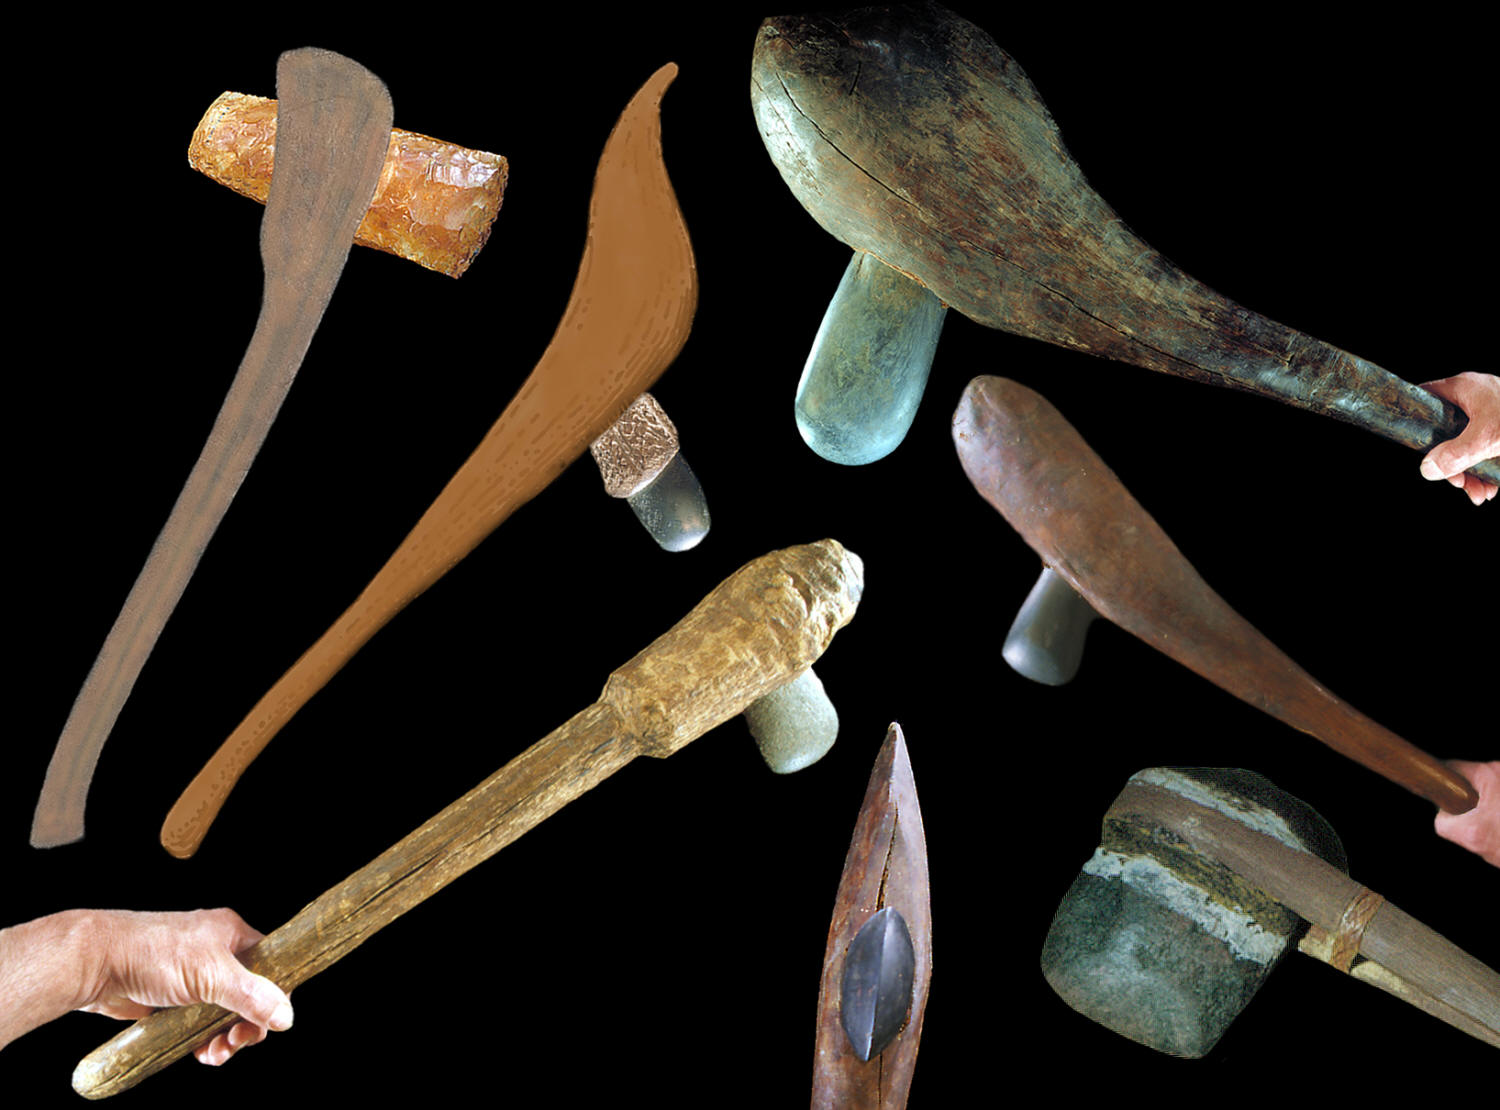 Seven hafted axes from different areas of the world.